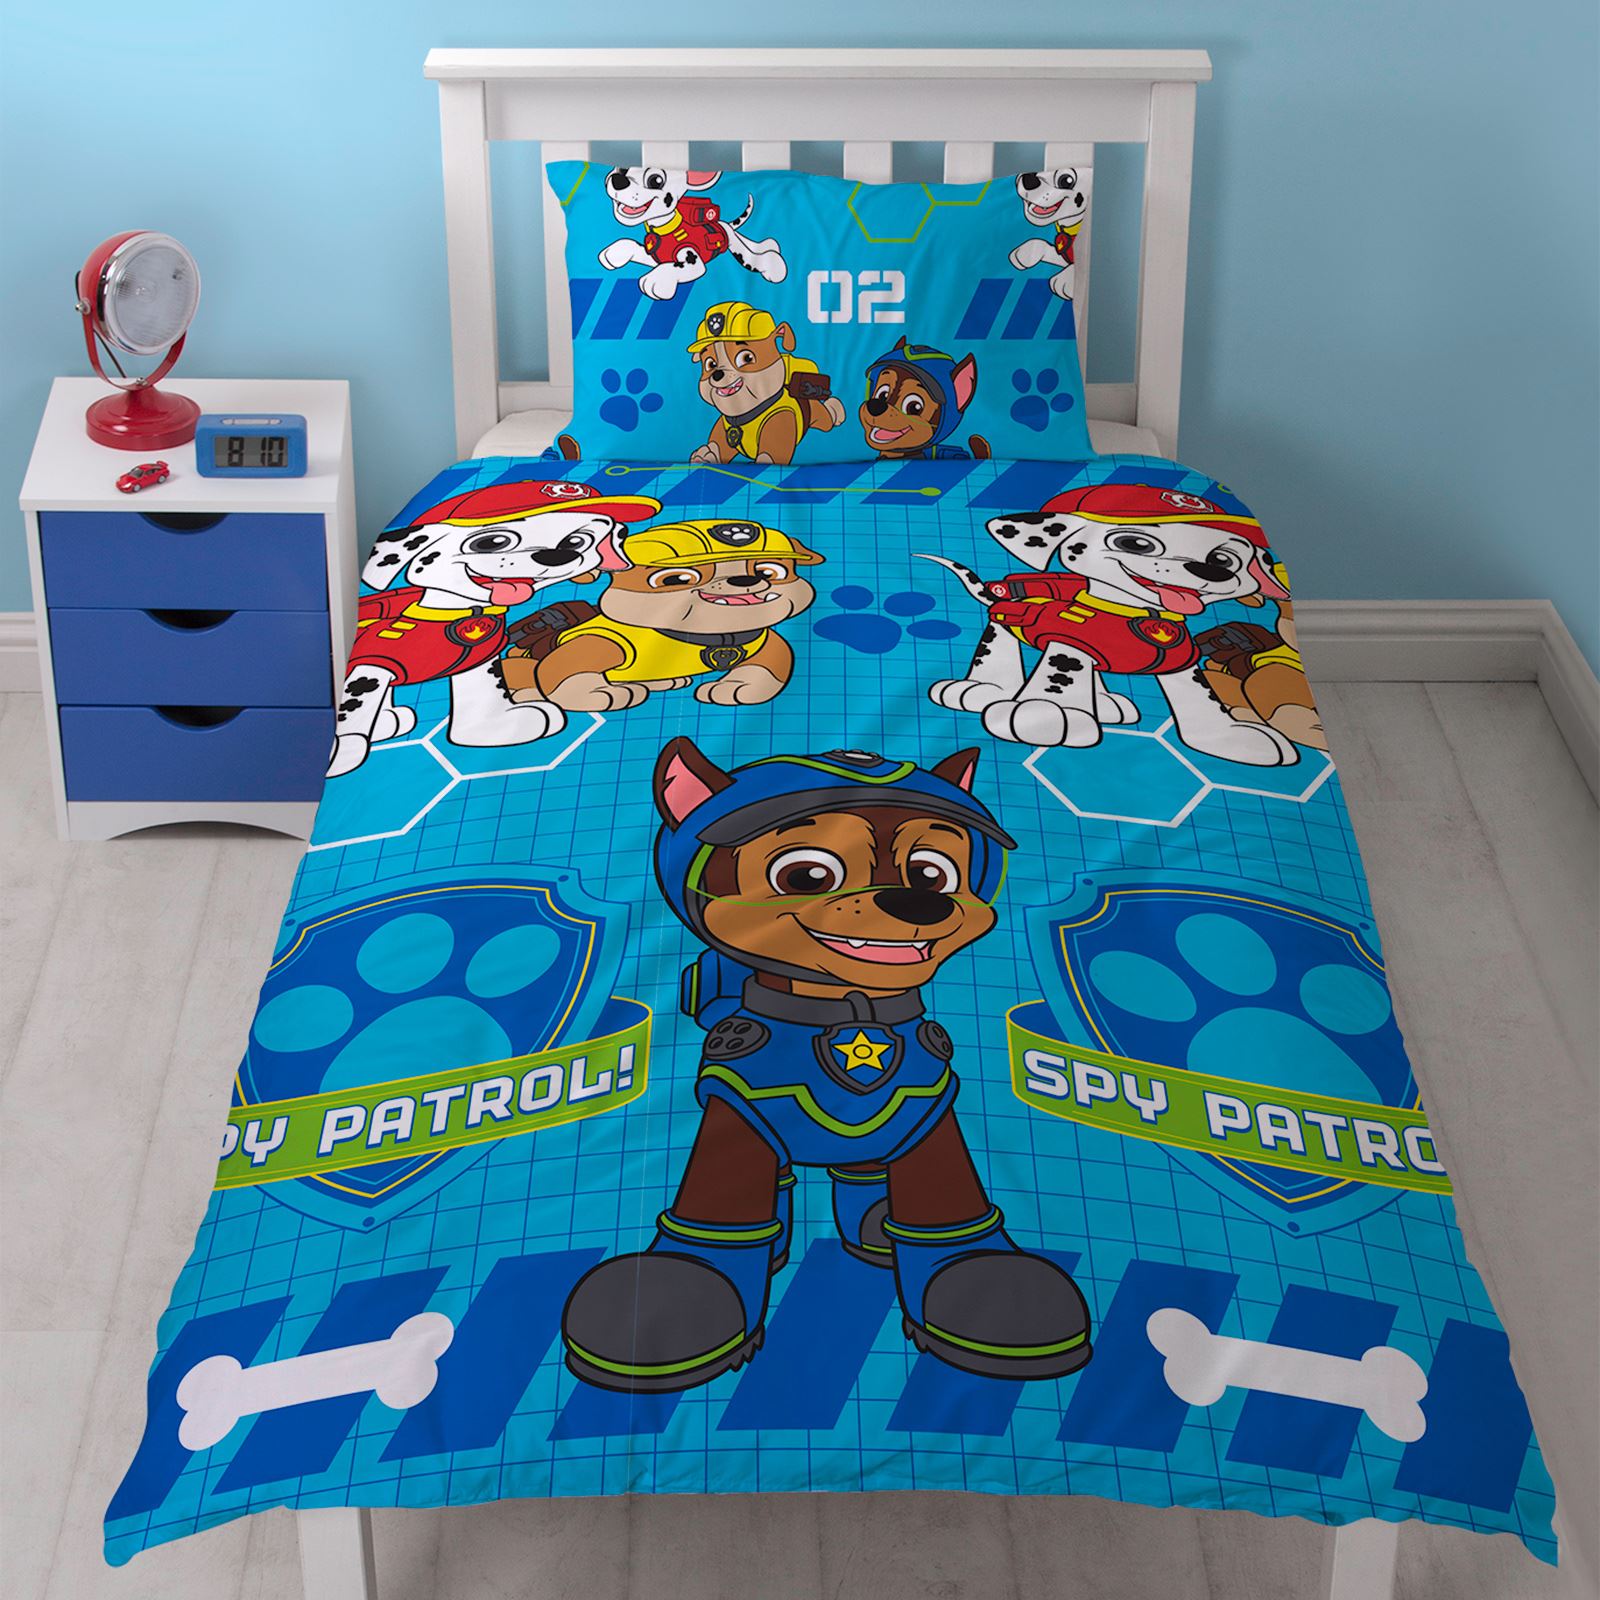 paw patrol bedroom wallpaper,bed sheet,bedding,textile,product,turquoise